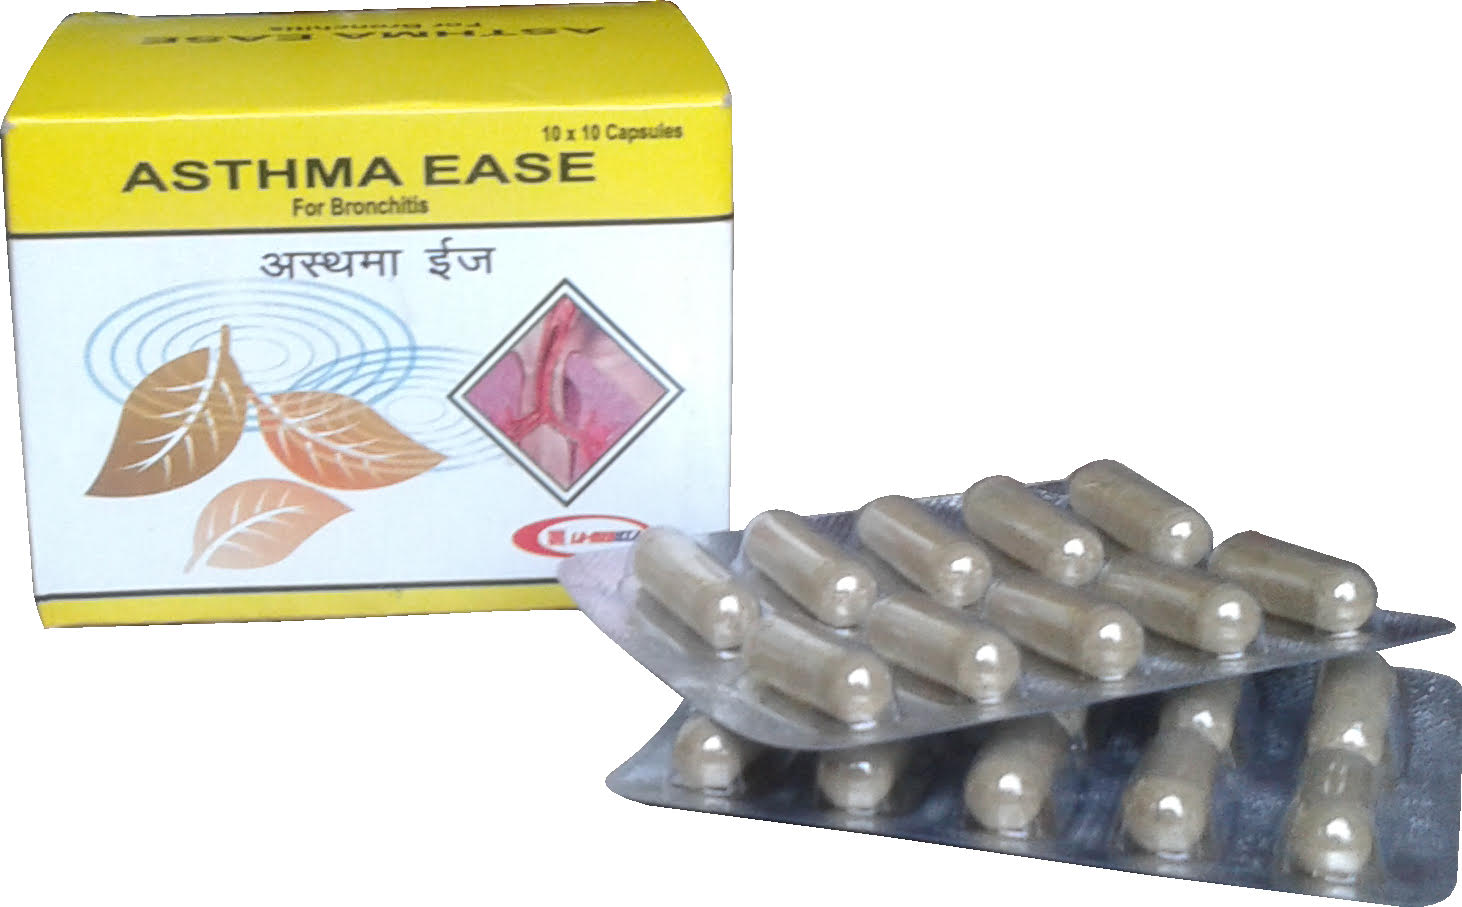 Asthma Ease Capsules